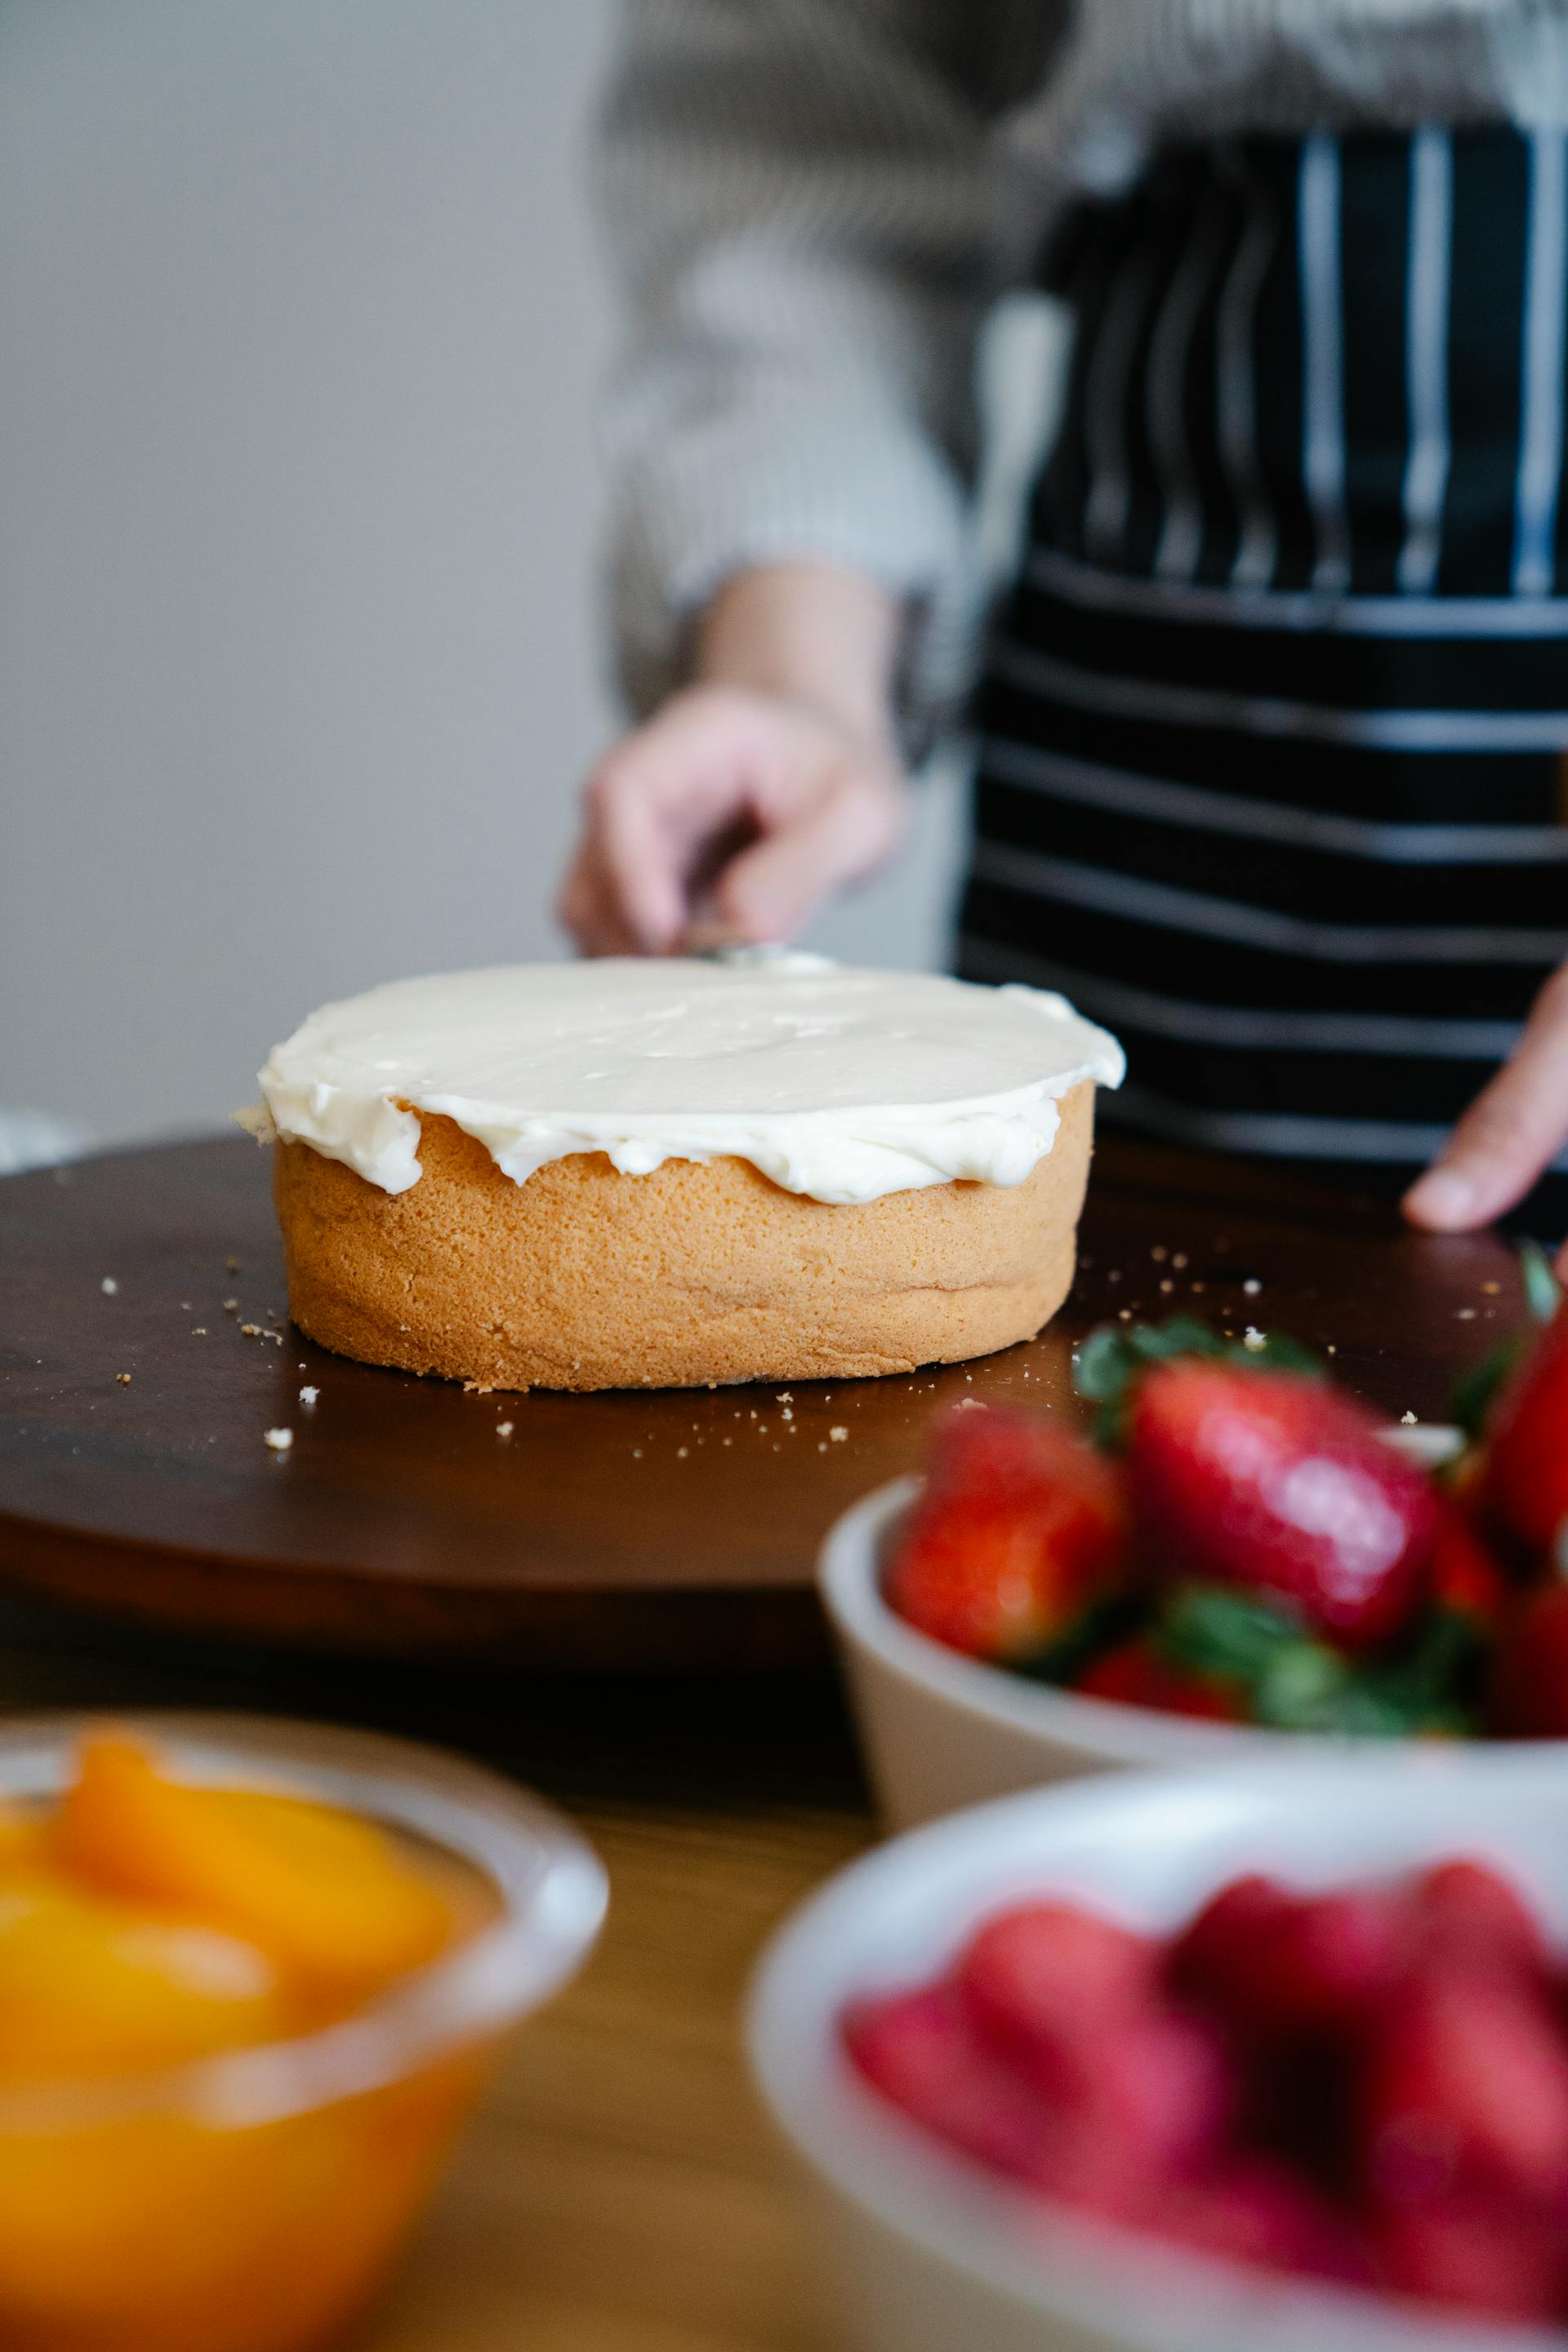 A woman putting the icing on a cake | Source: Pexels